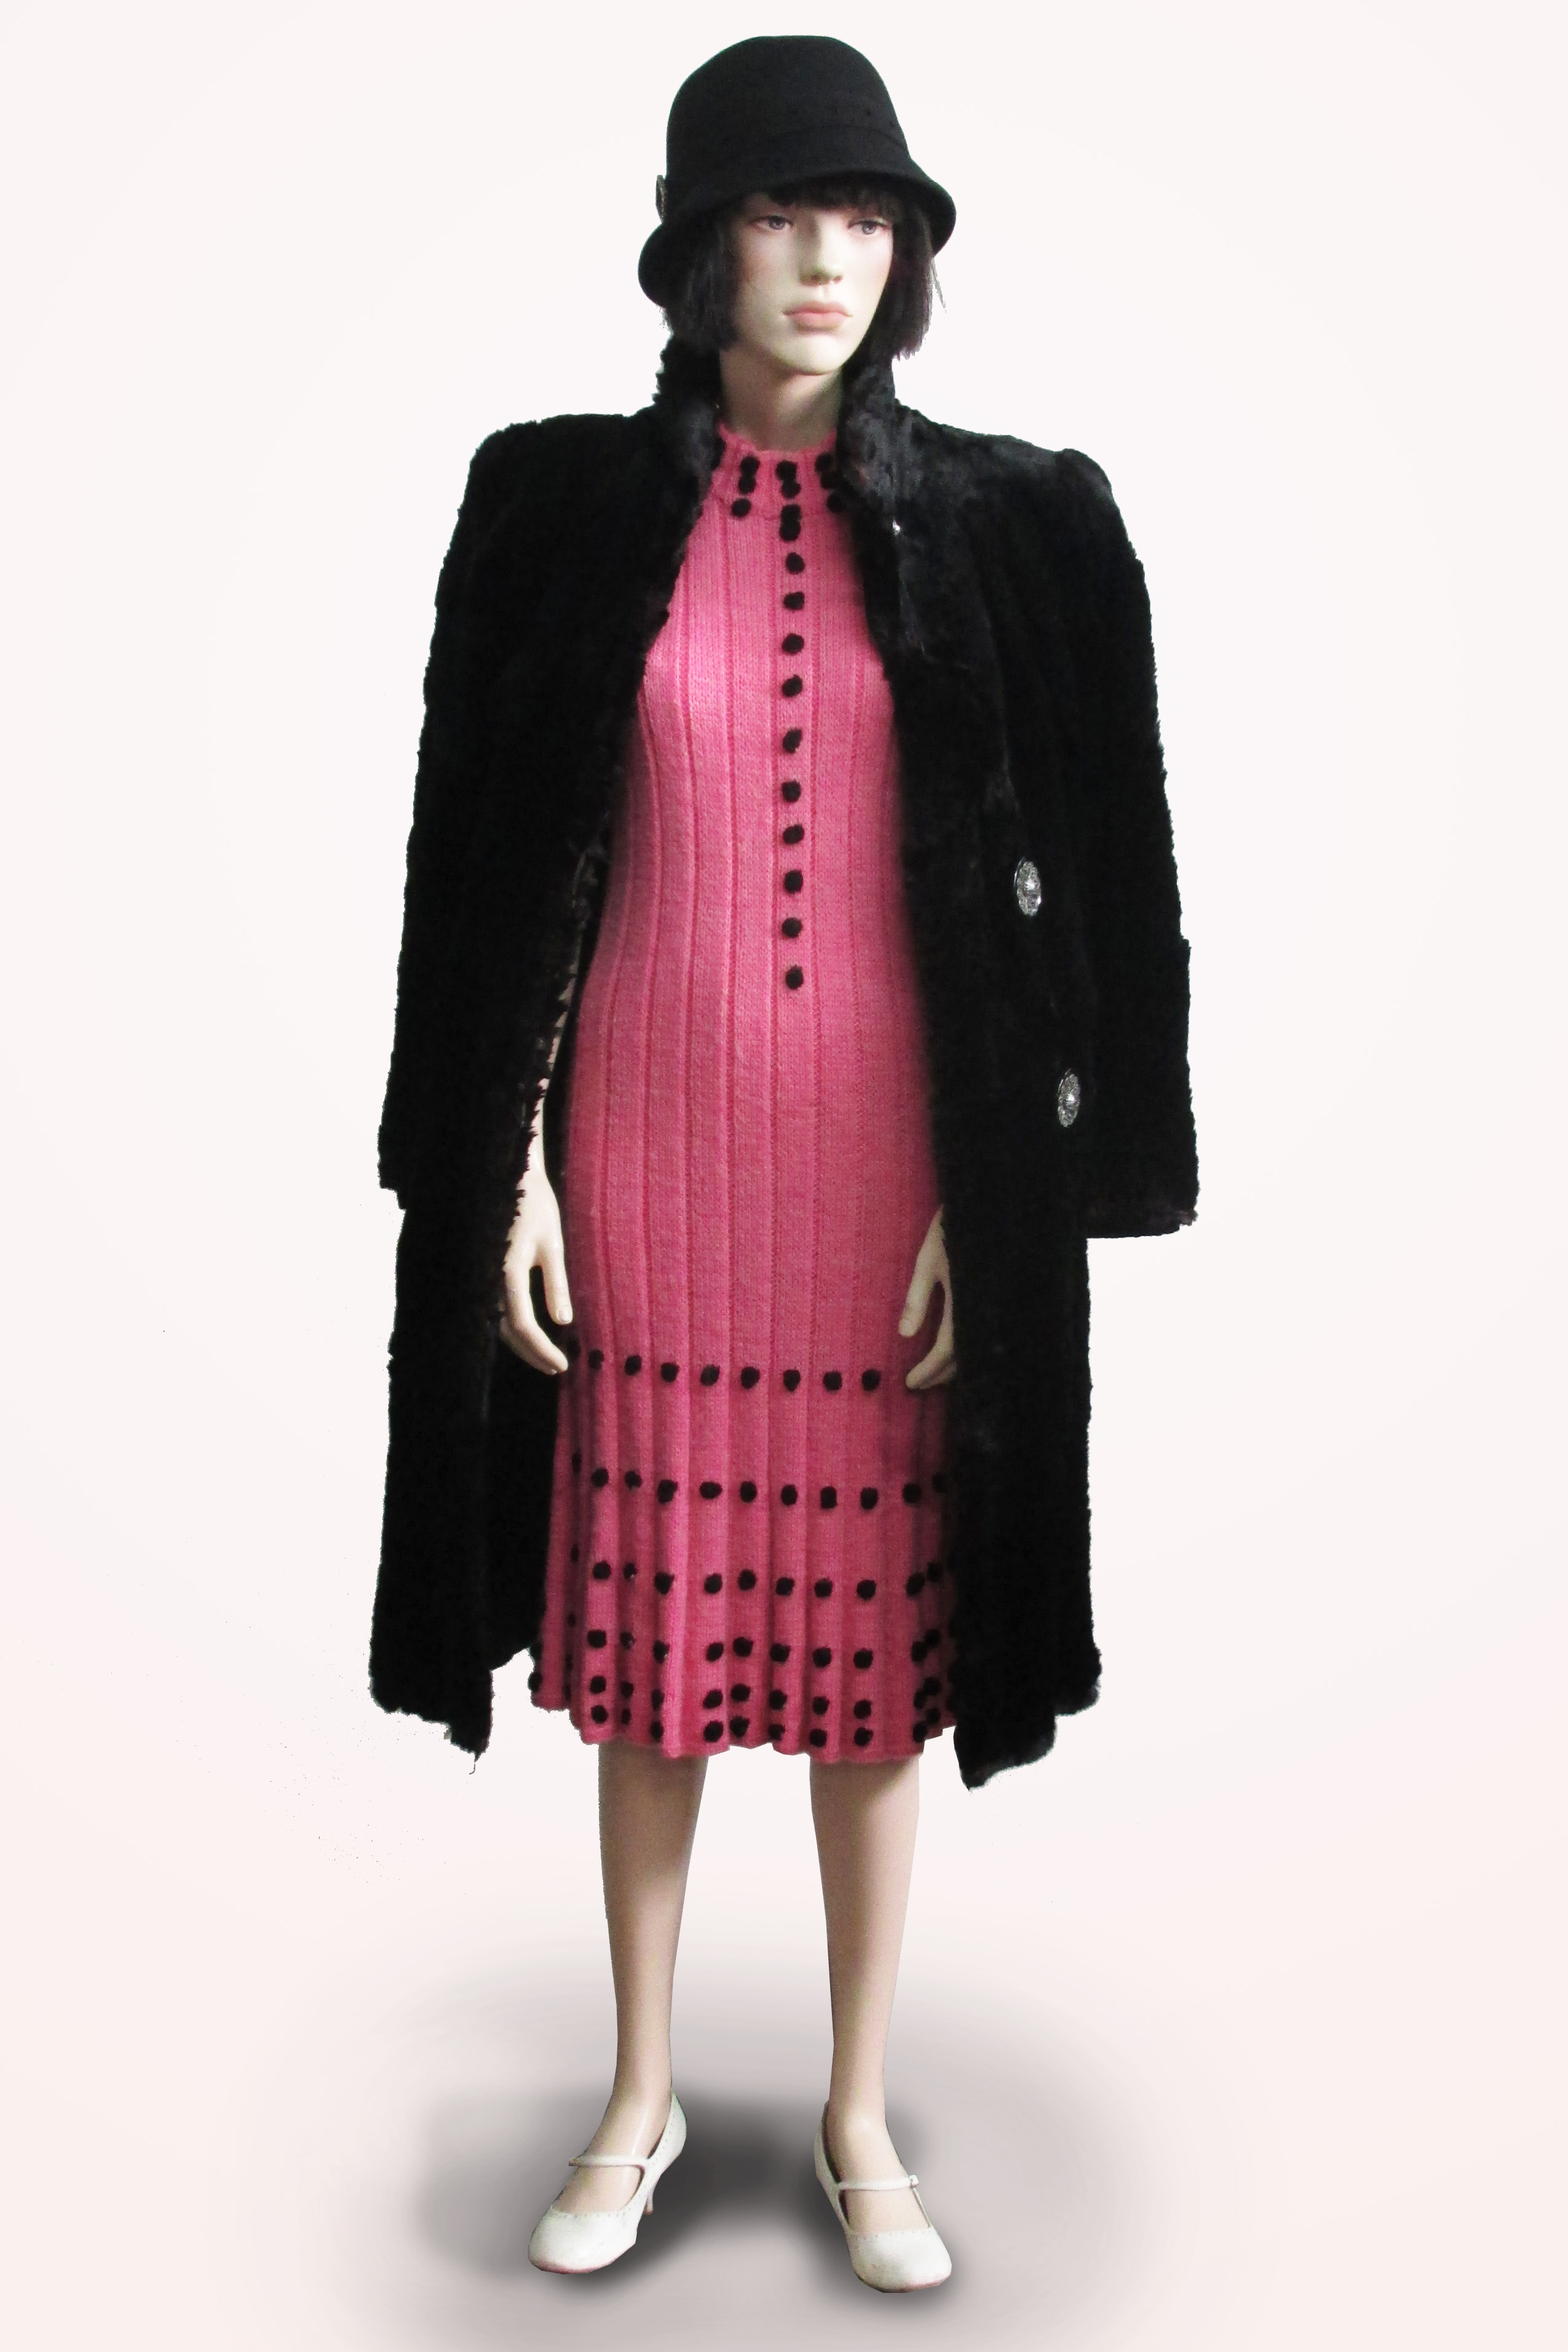 Knitted Pink Dress with Black Fur Coat 1920s/30s